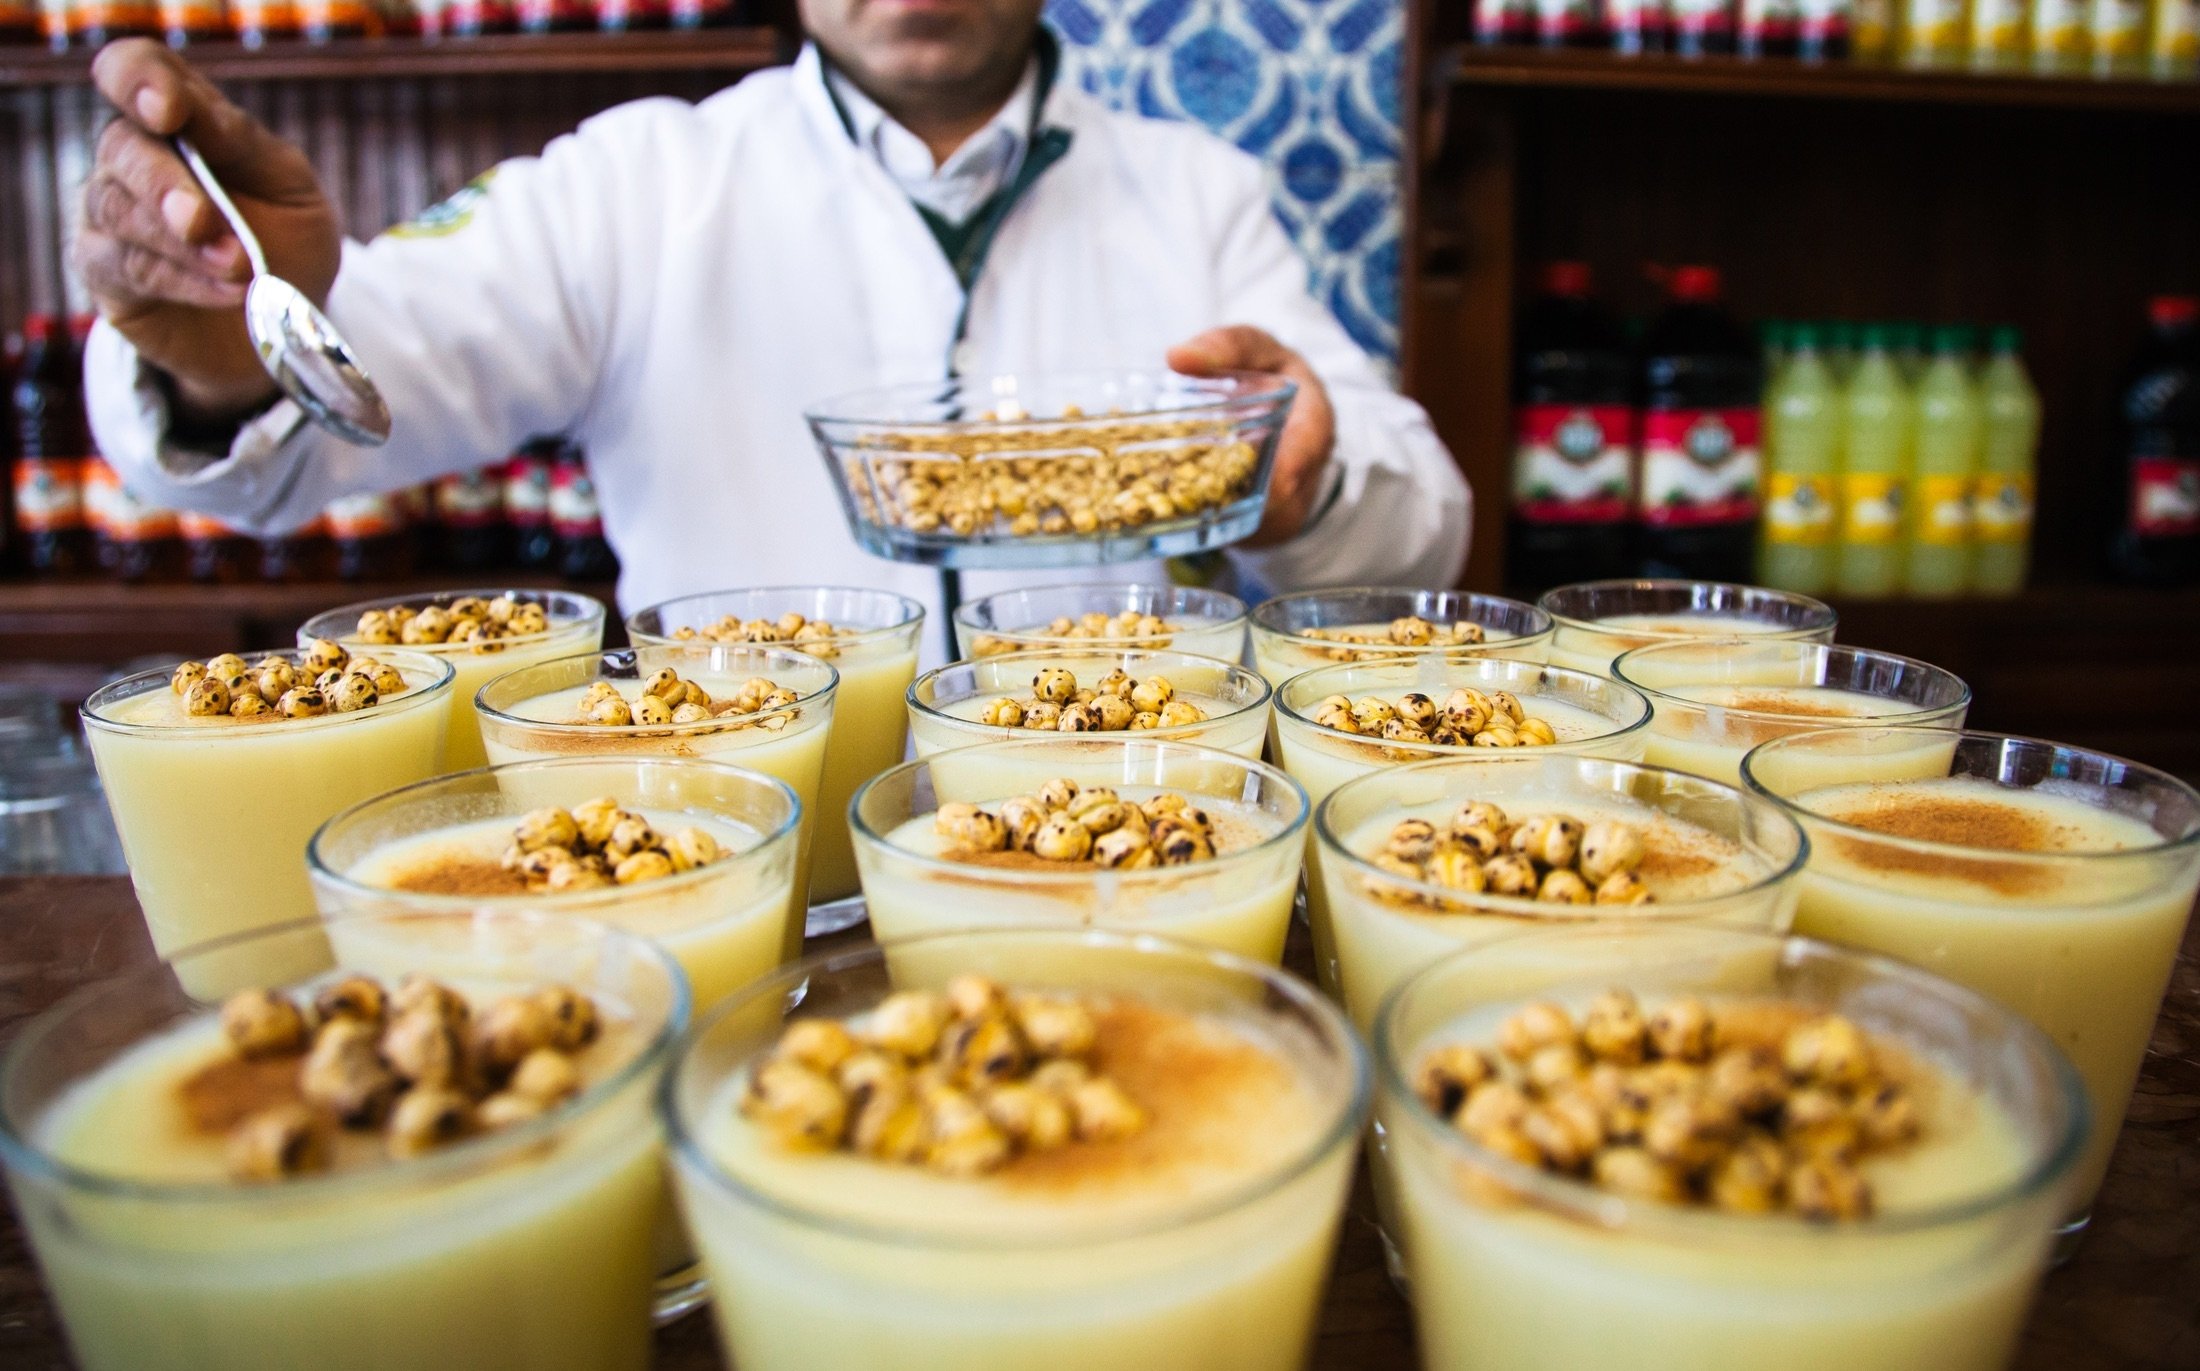 Boza, which is said to strengthen the immune system, is a historical beverage that has been drunk since the Ottoman Empire. (Shutterstock Photo)